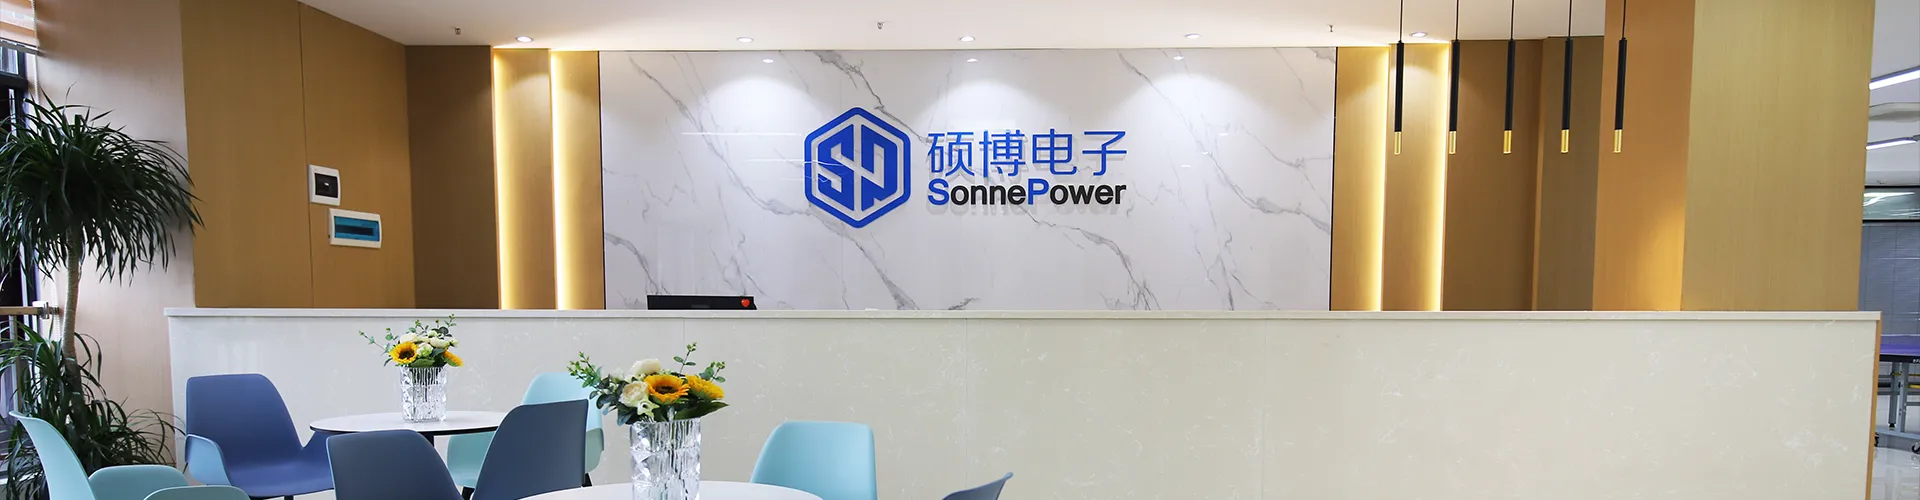 About SonnePower 